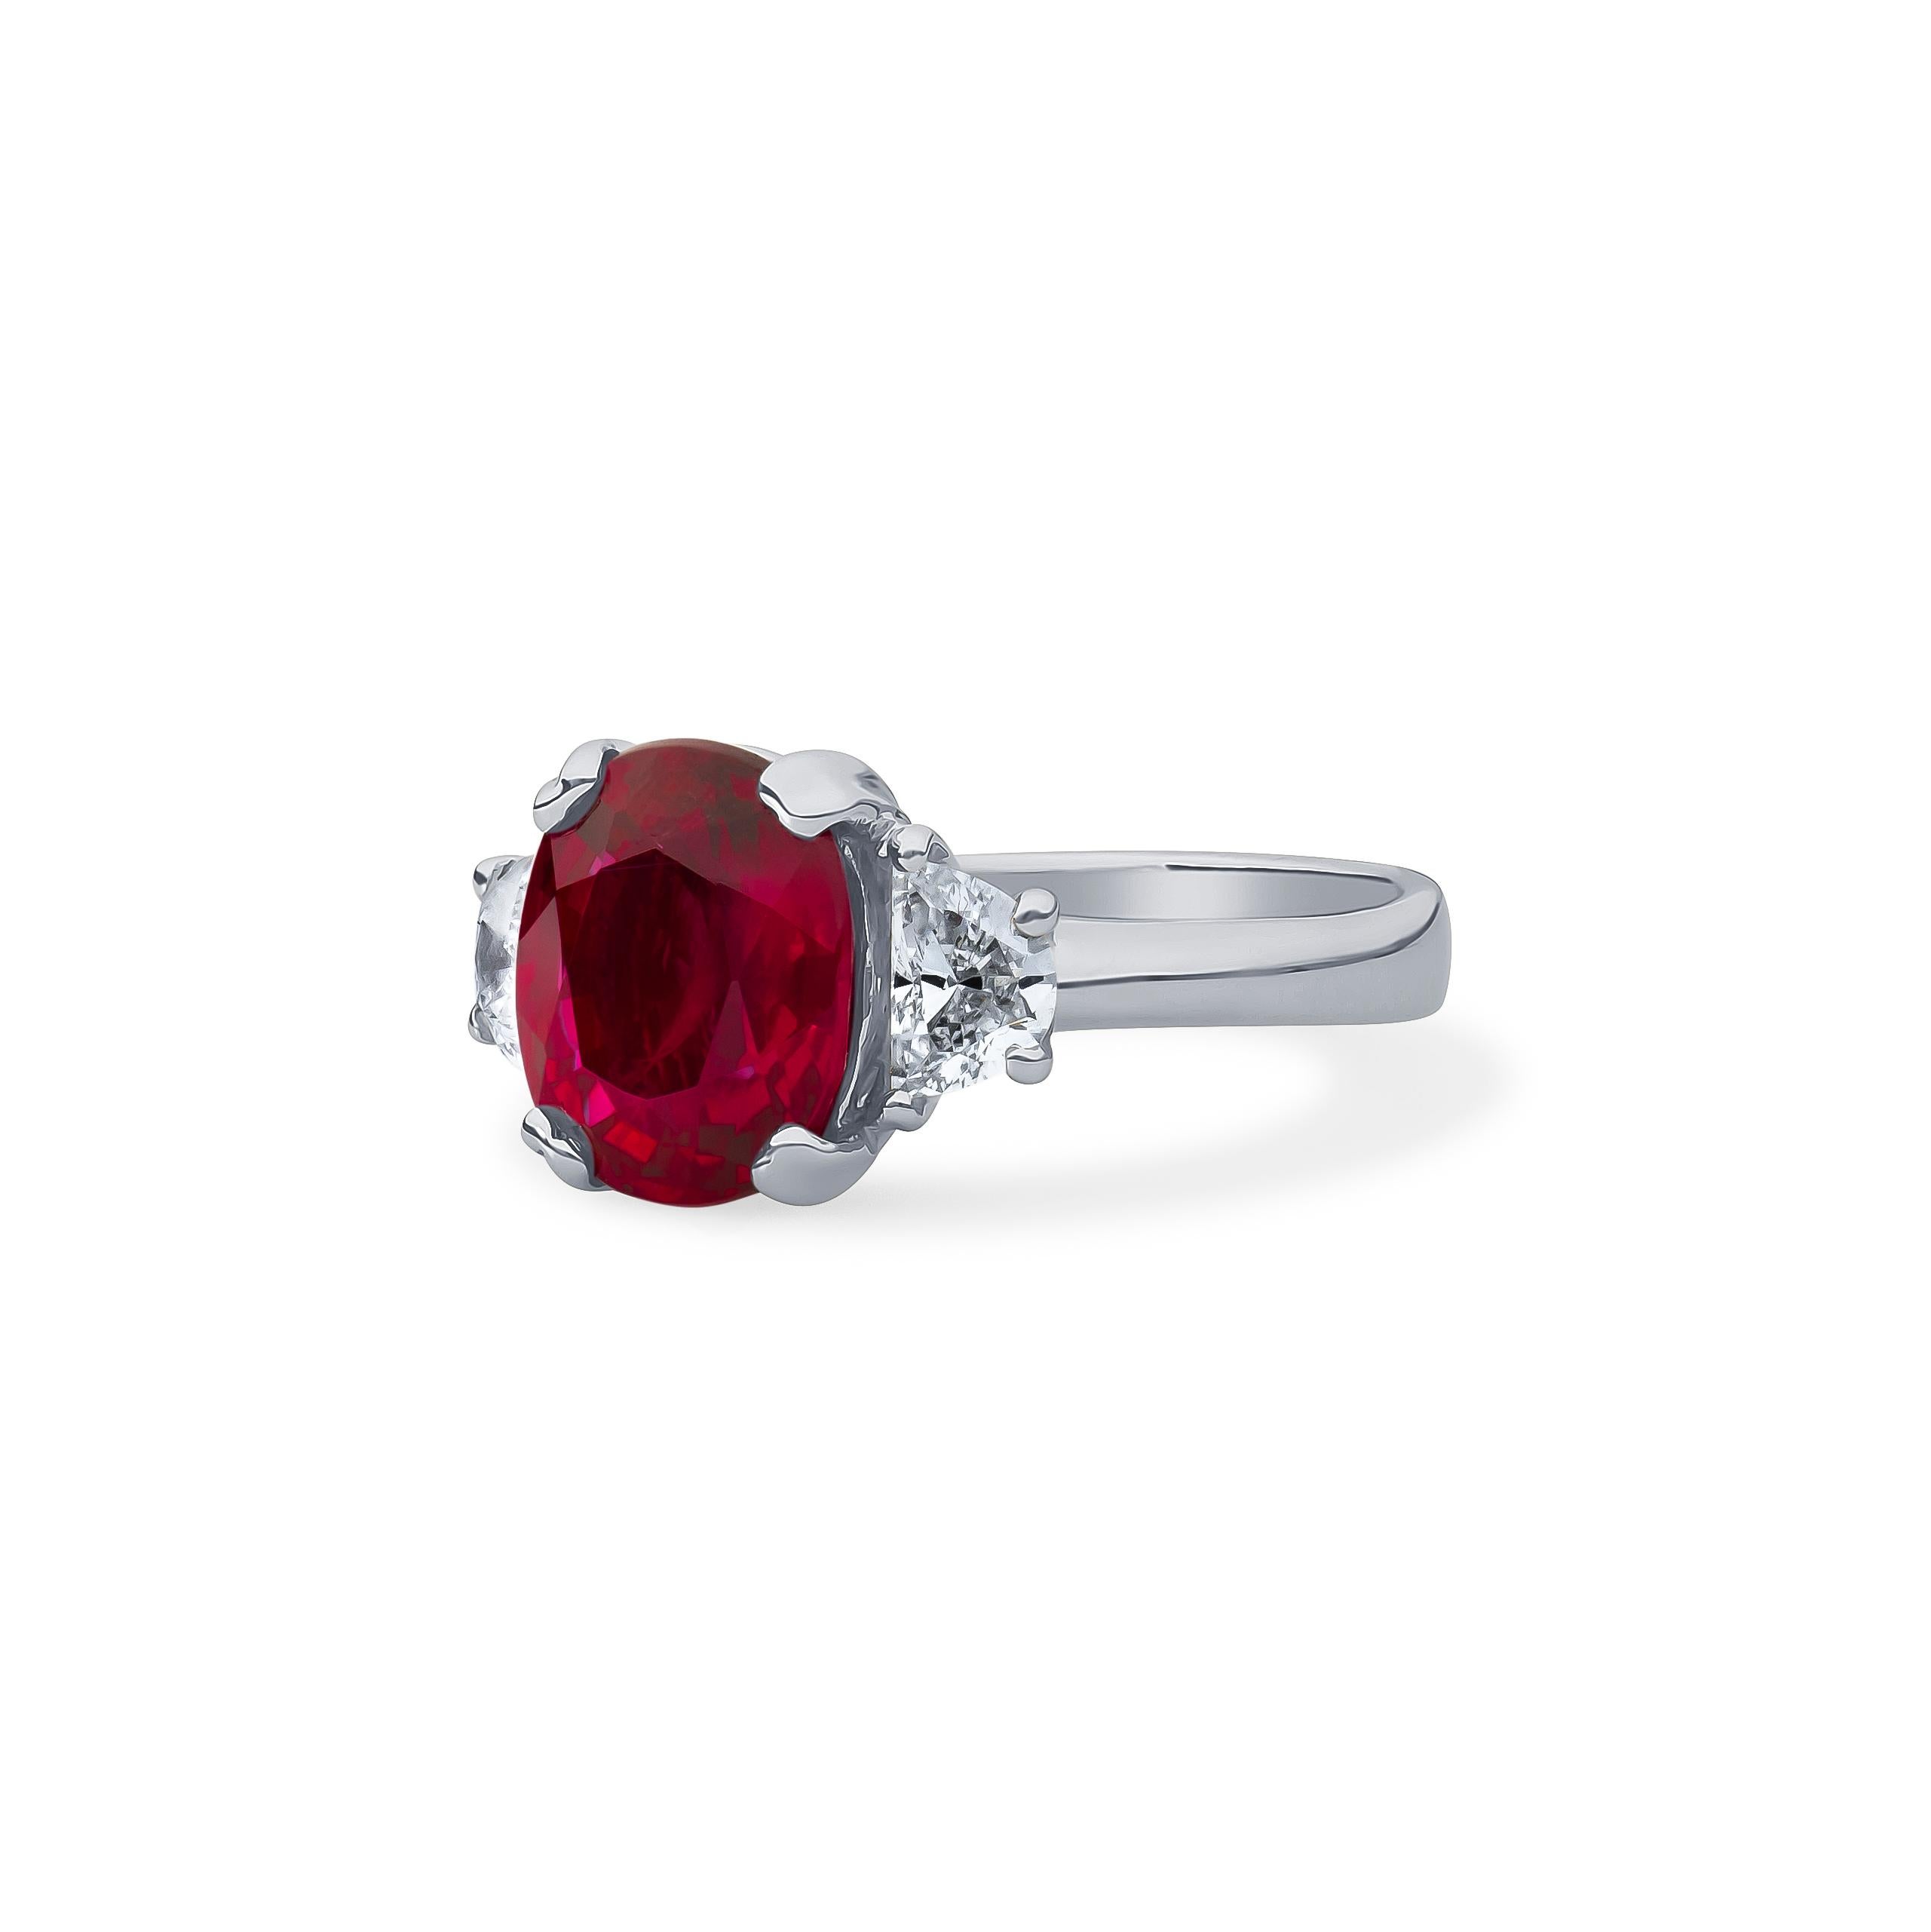 Platinum three-stone ring set with one 3.11 carat oval cut natural Thai ruby, comes with its very own certification from the AGL laboratory, and approximately 0.50 carats total weight in two half moon diamonds set on both sides of the ruby. The ring